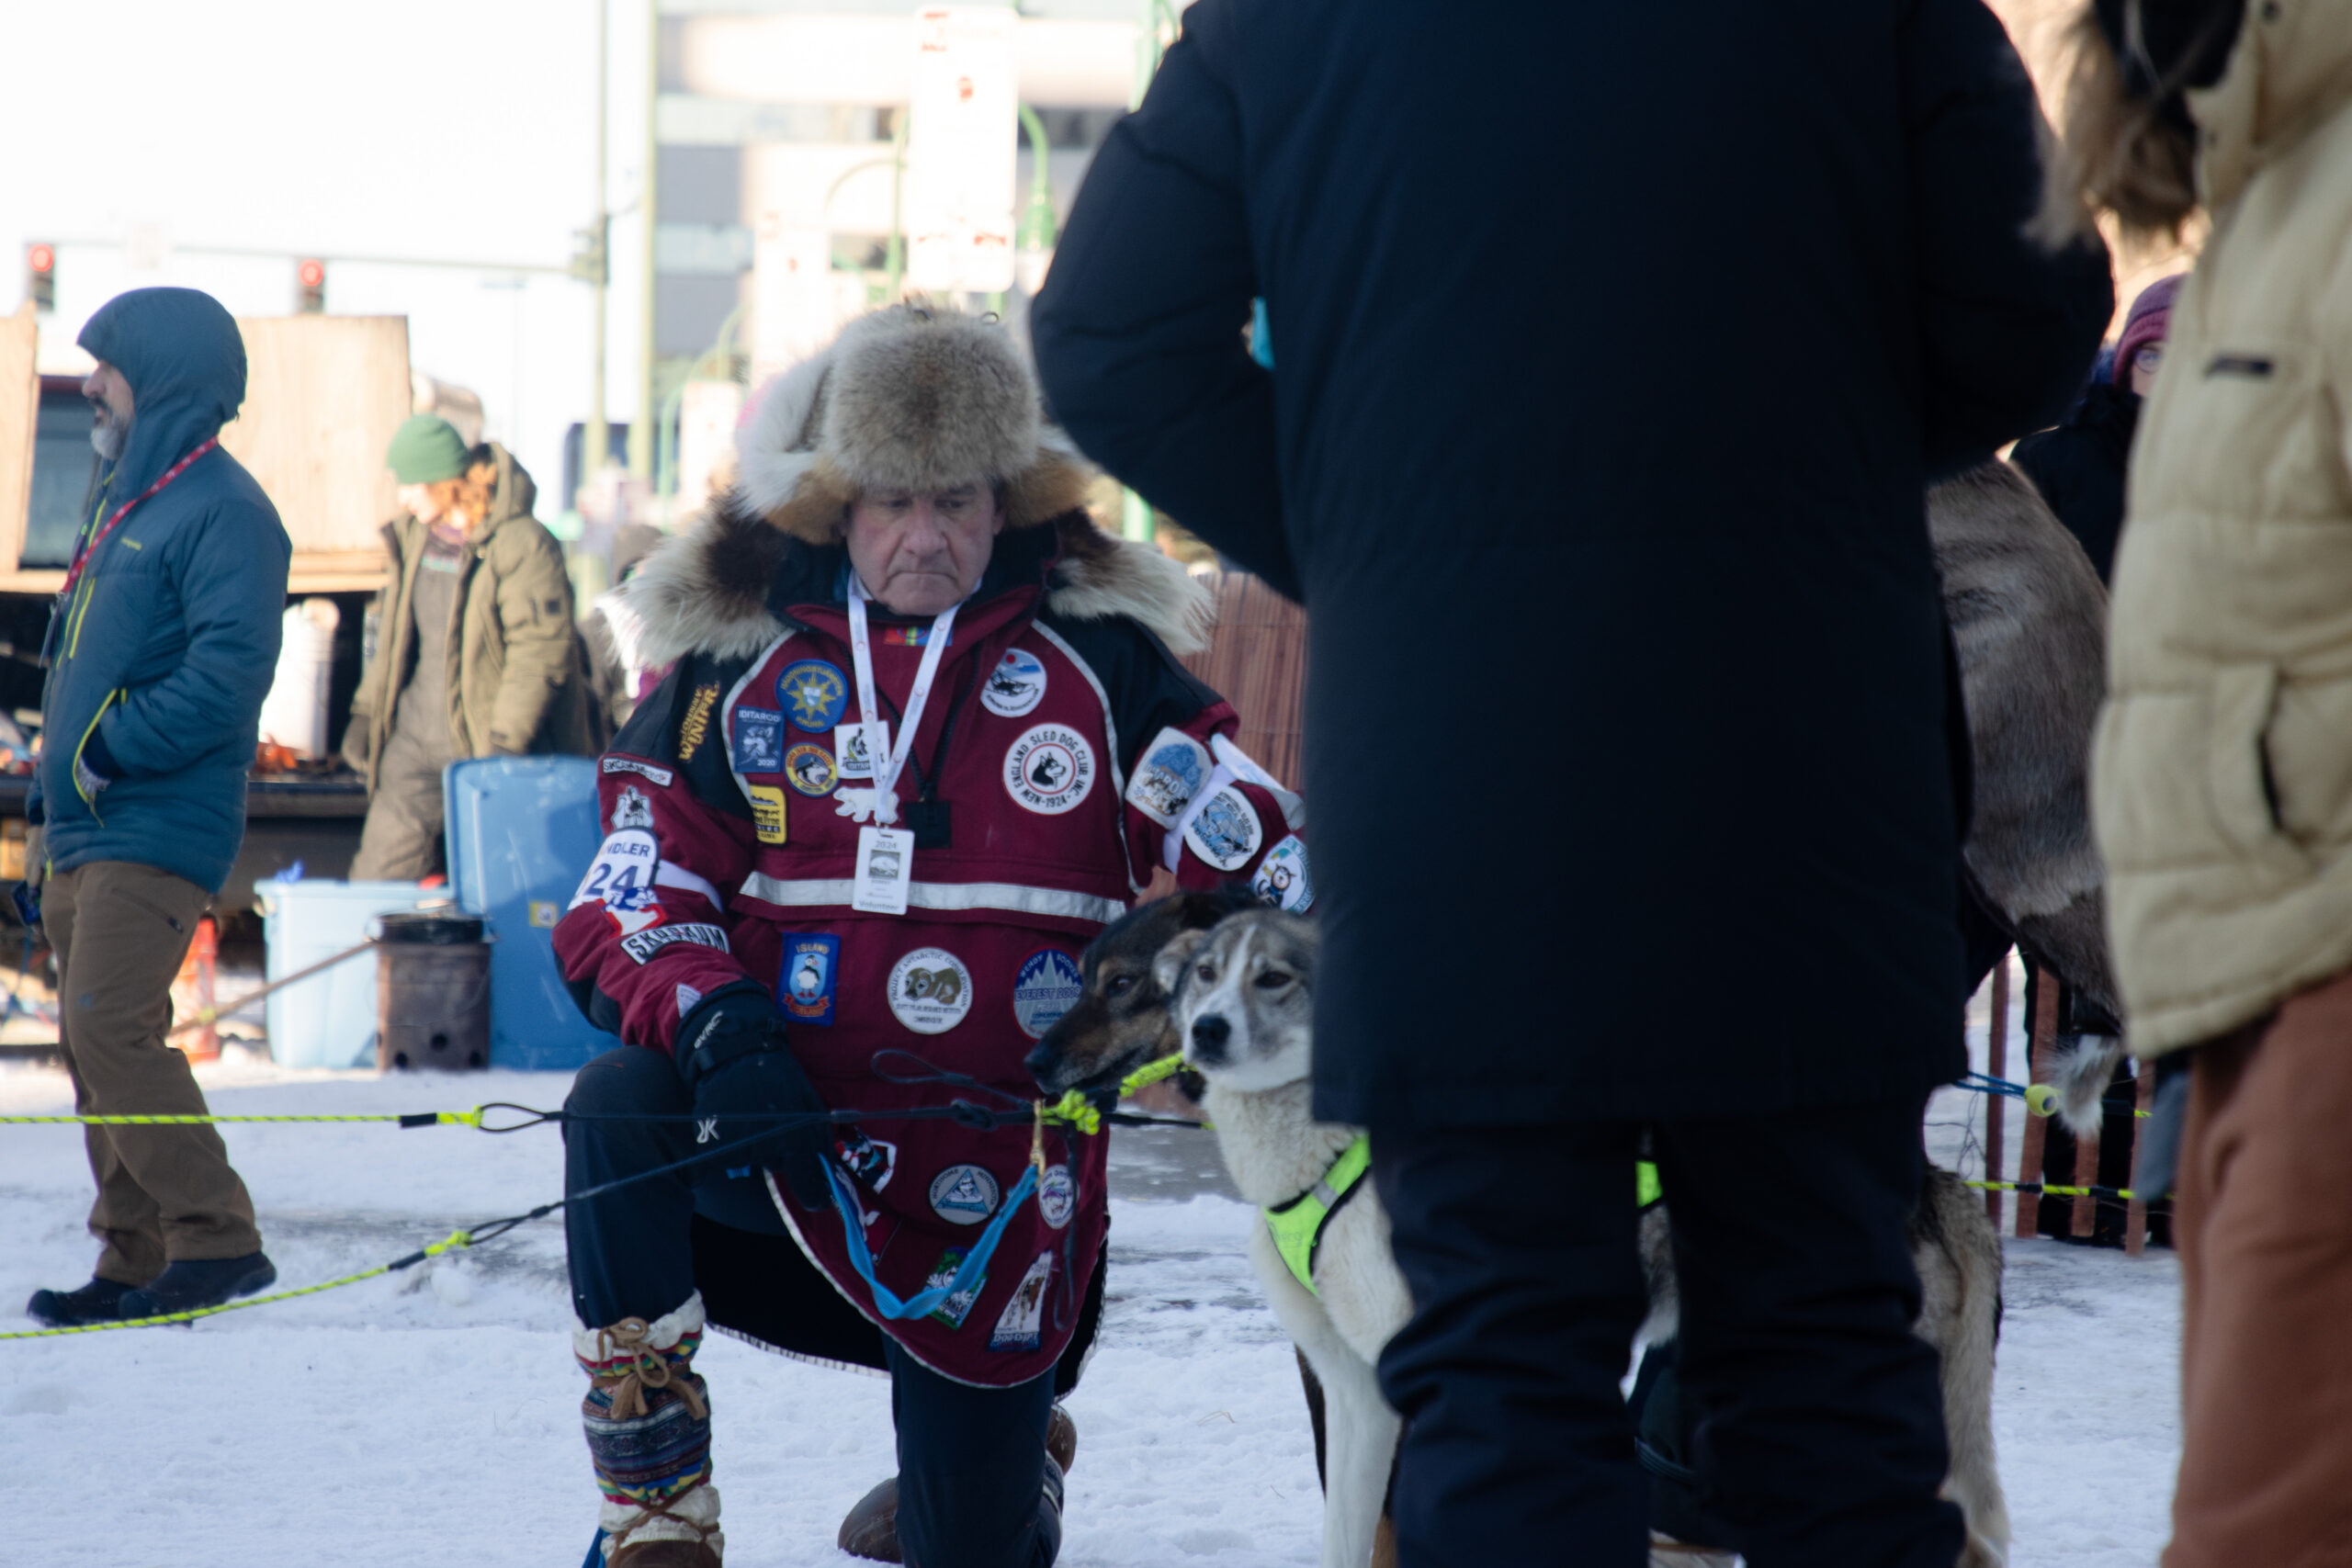 A man with a fur hat and a red jacket that has several iditarod patches on it kneels next to 2 dogs.